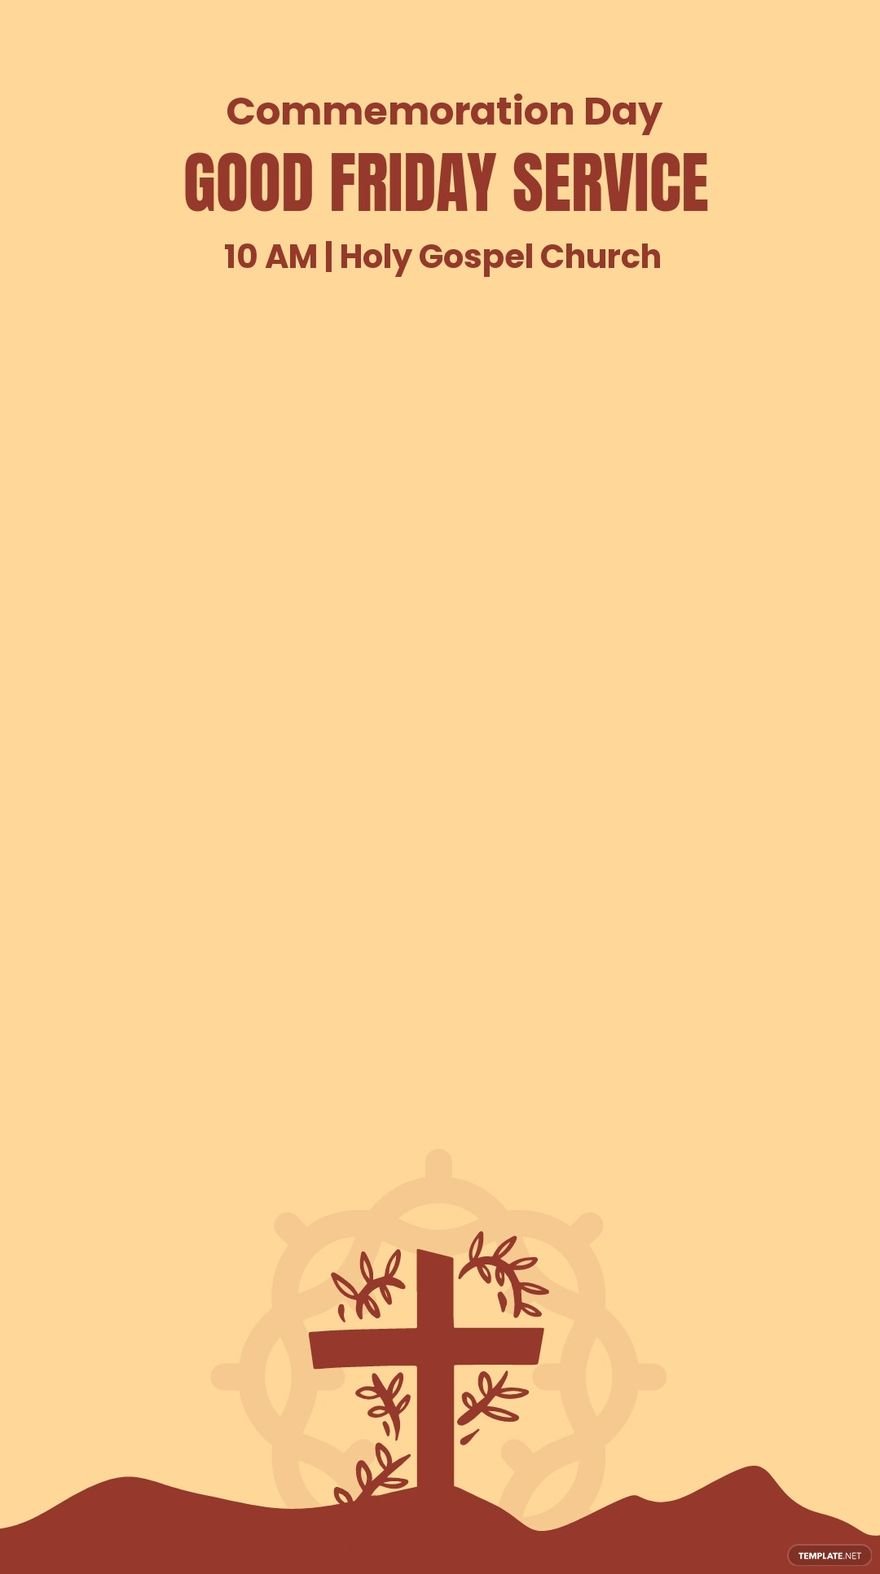 Free Good Friday Service Snapchat Geofilter Template